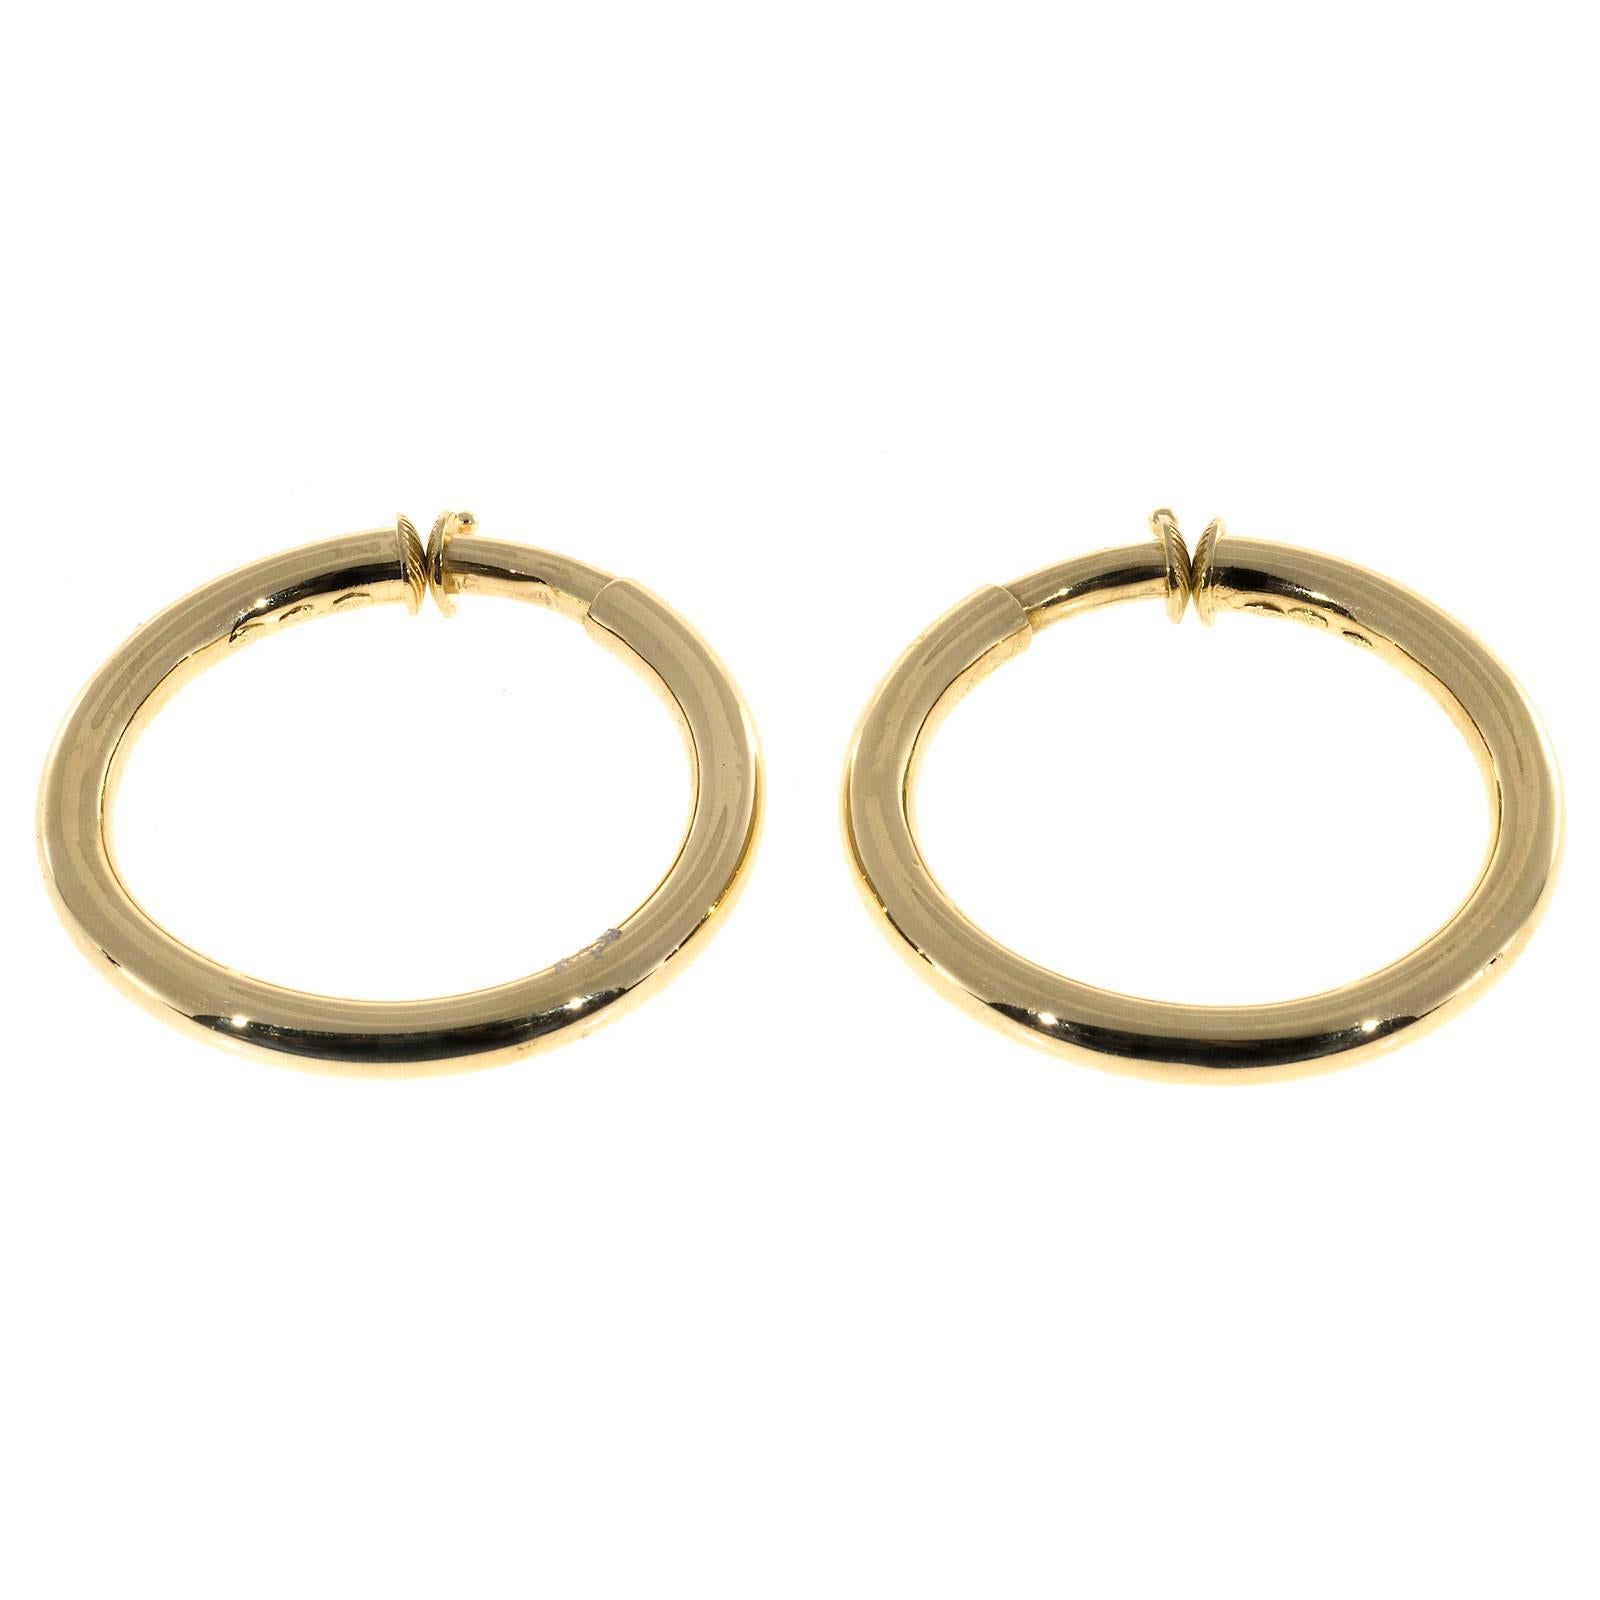 18k yellow gold spring loaded non pierced hoop earrings. Comfortable and secure on the ear. Spring loaded non pierced hoop earrings.

18k Yellow Gold
Stamped: 750 Italian hallmarks
21.2 grams
Diameter: 40.37mm or 1.59 inches
Tubing: 4.5mm